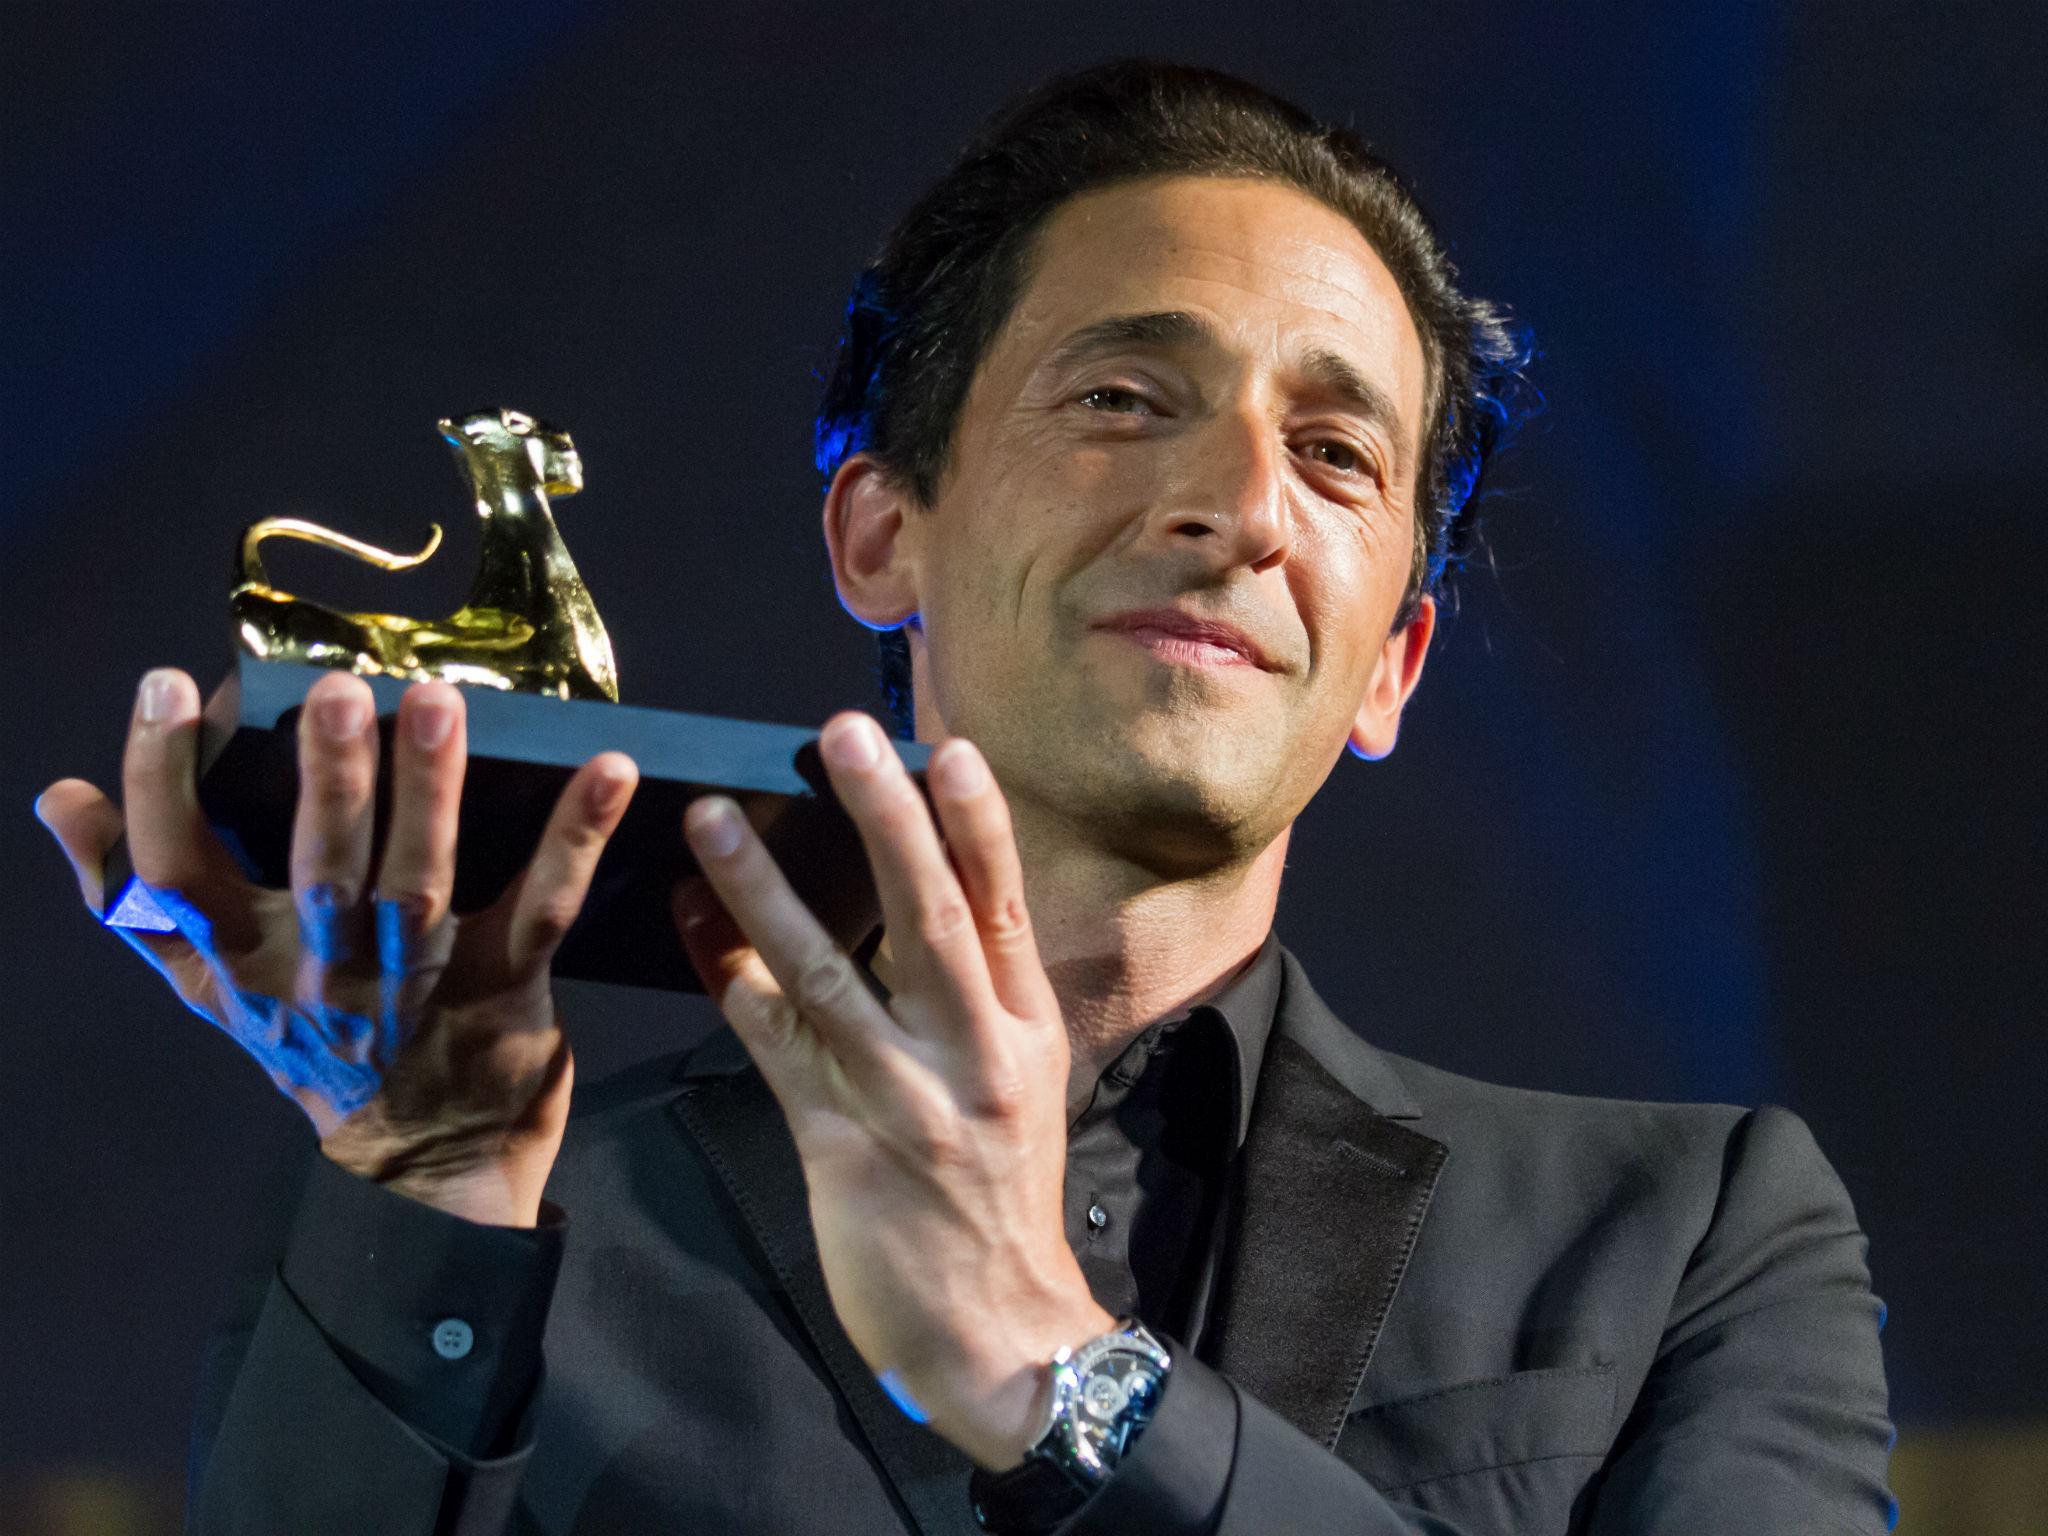 Actor Adrien Brody collects the Leopard Club Award at the Locarno Film Festival